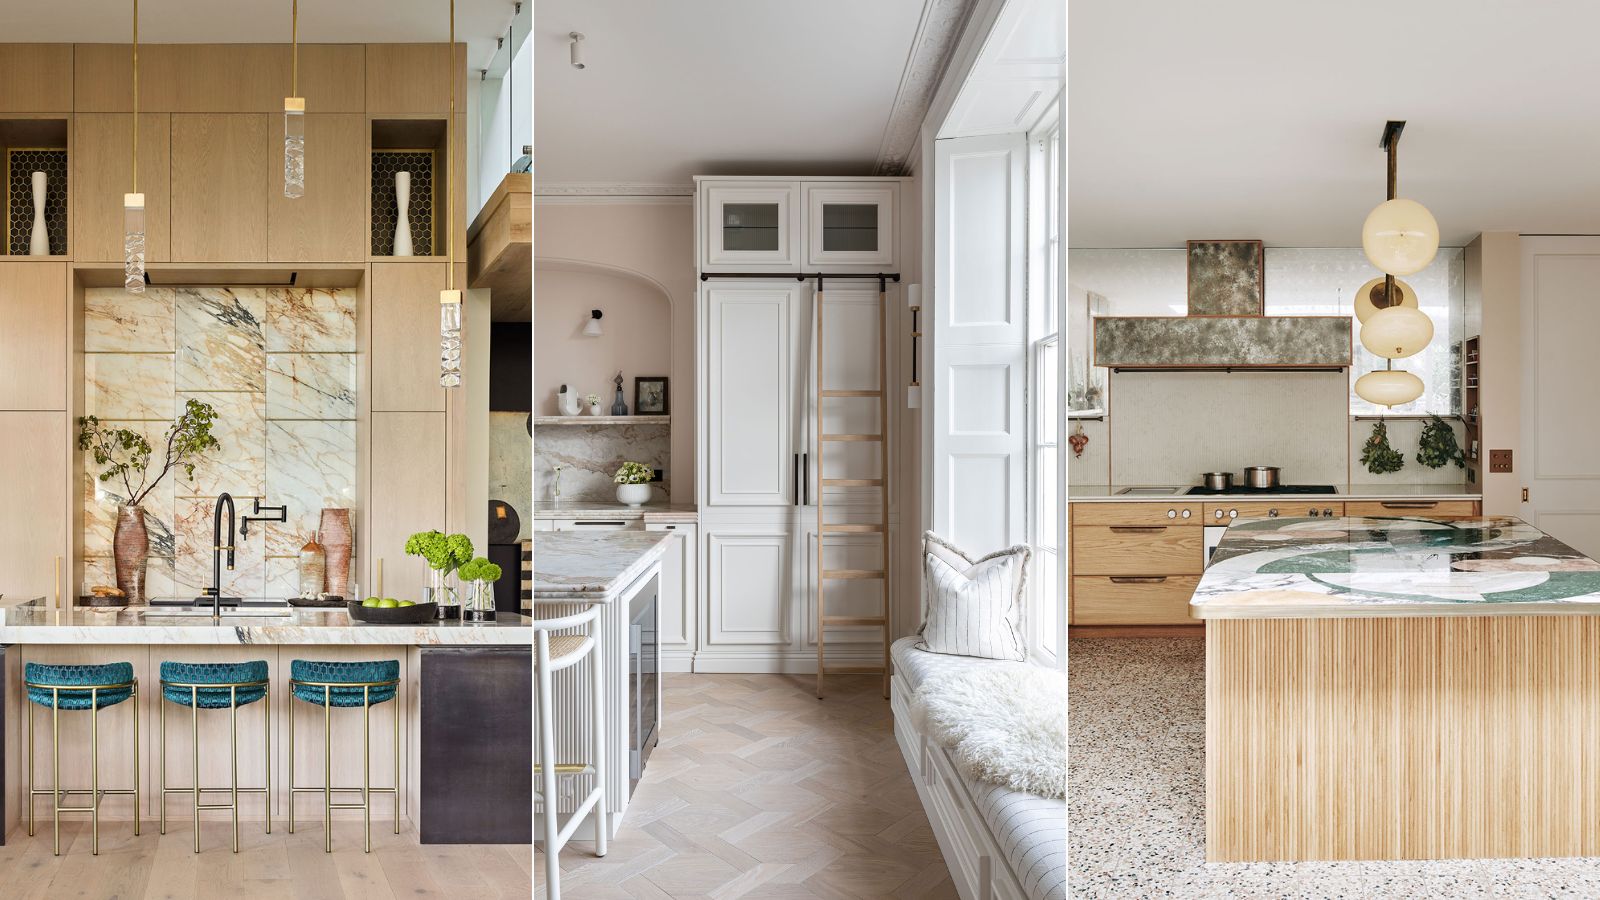 Built-In Pantry, Floor to Ceiling Cabinets